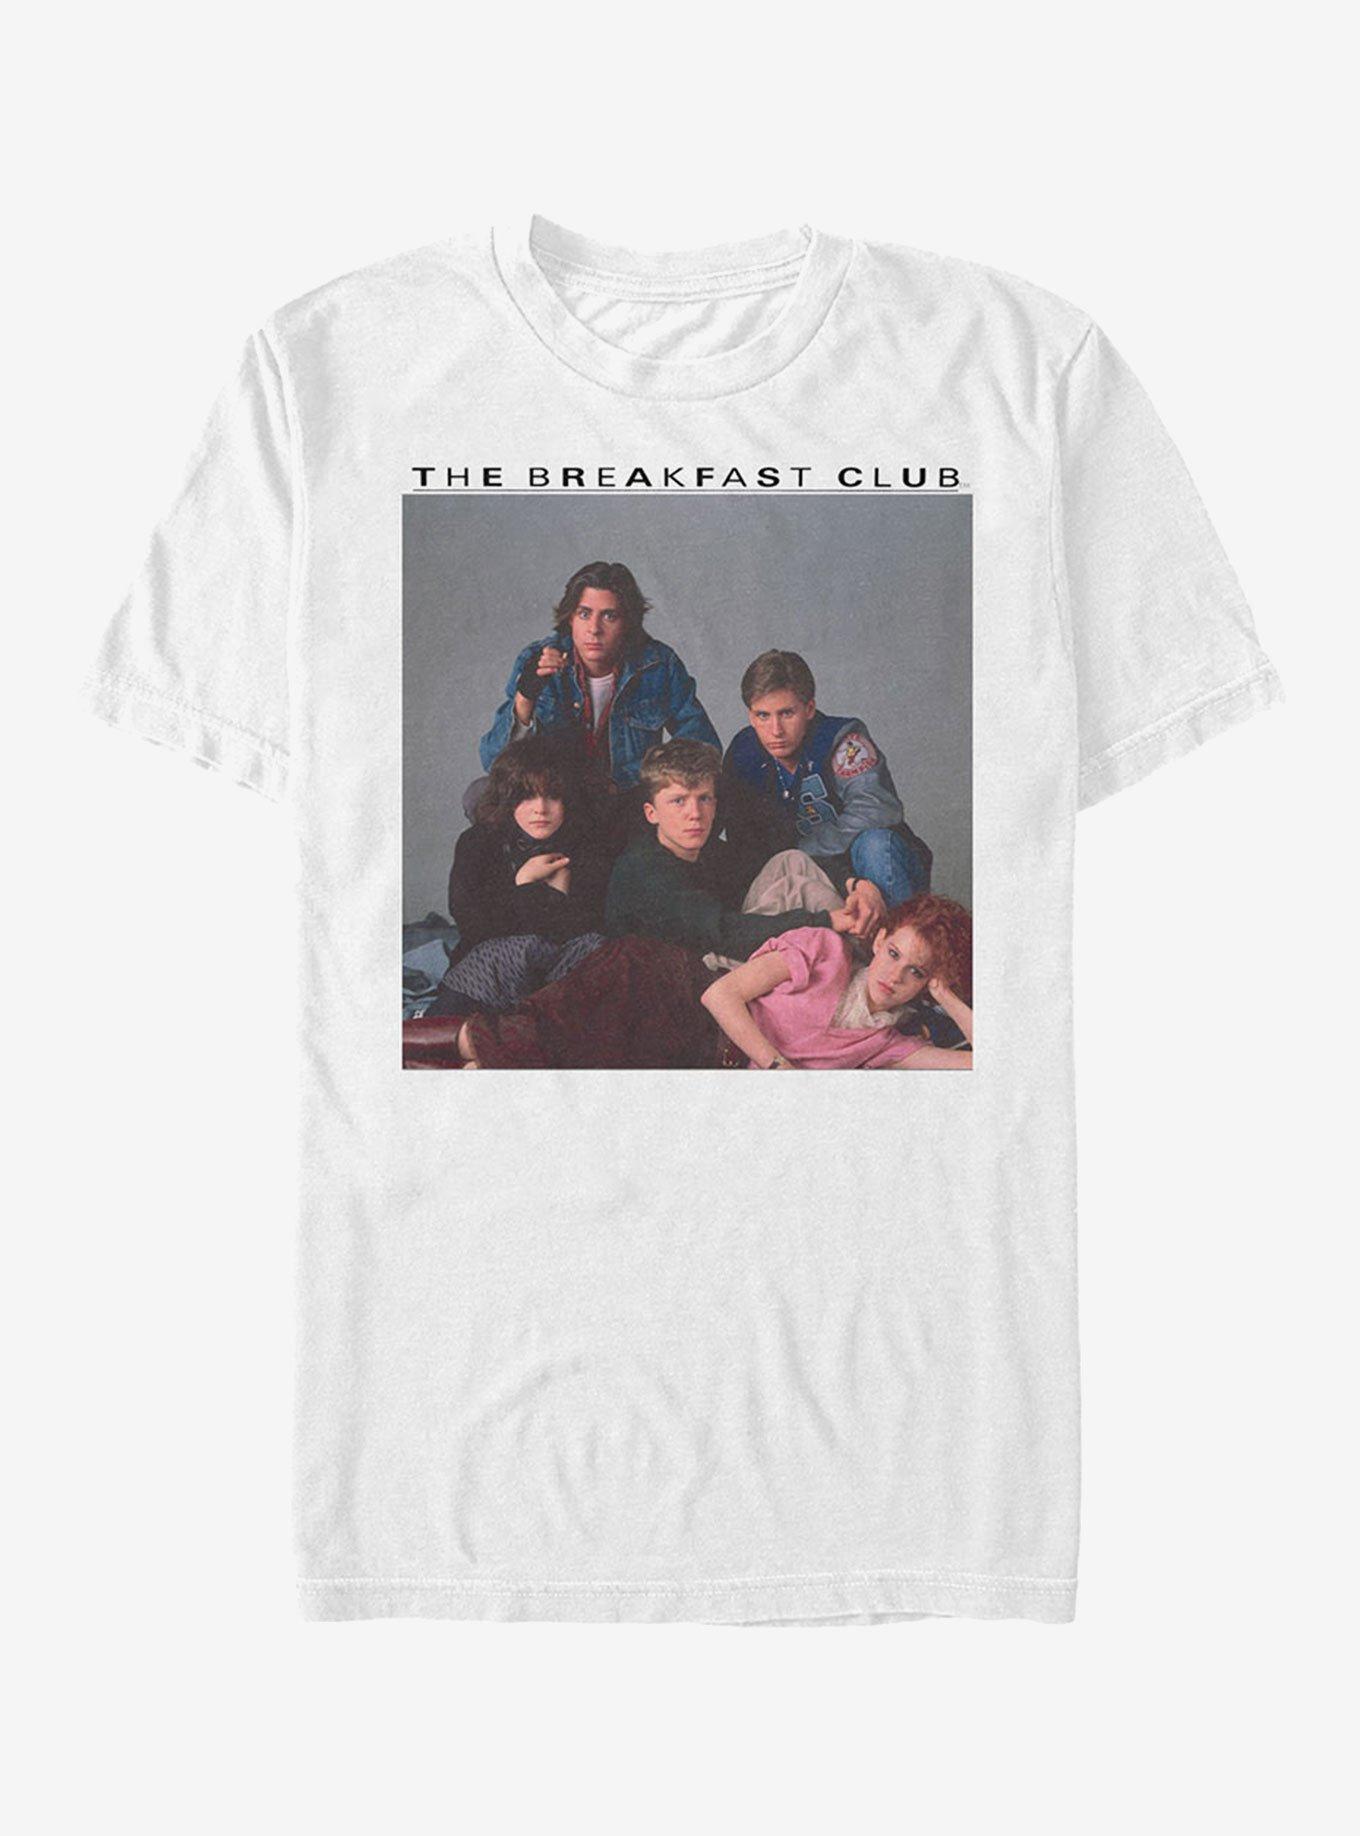 The Breakfast Club Detention Group Pose T-Shirt, WHITE, hi-res